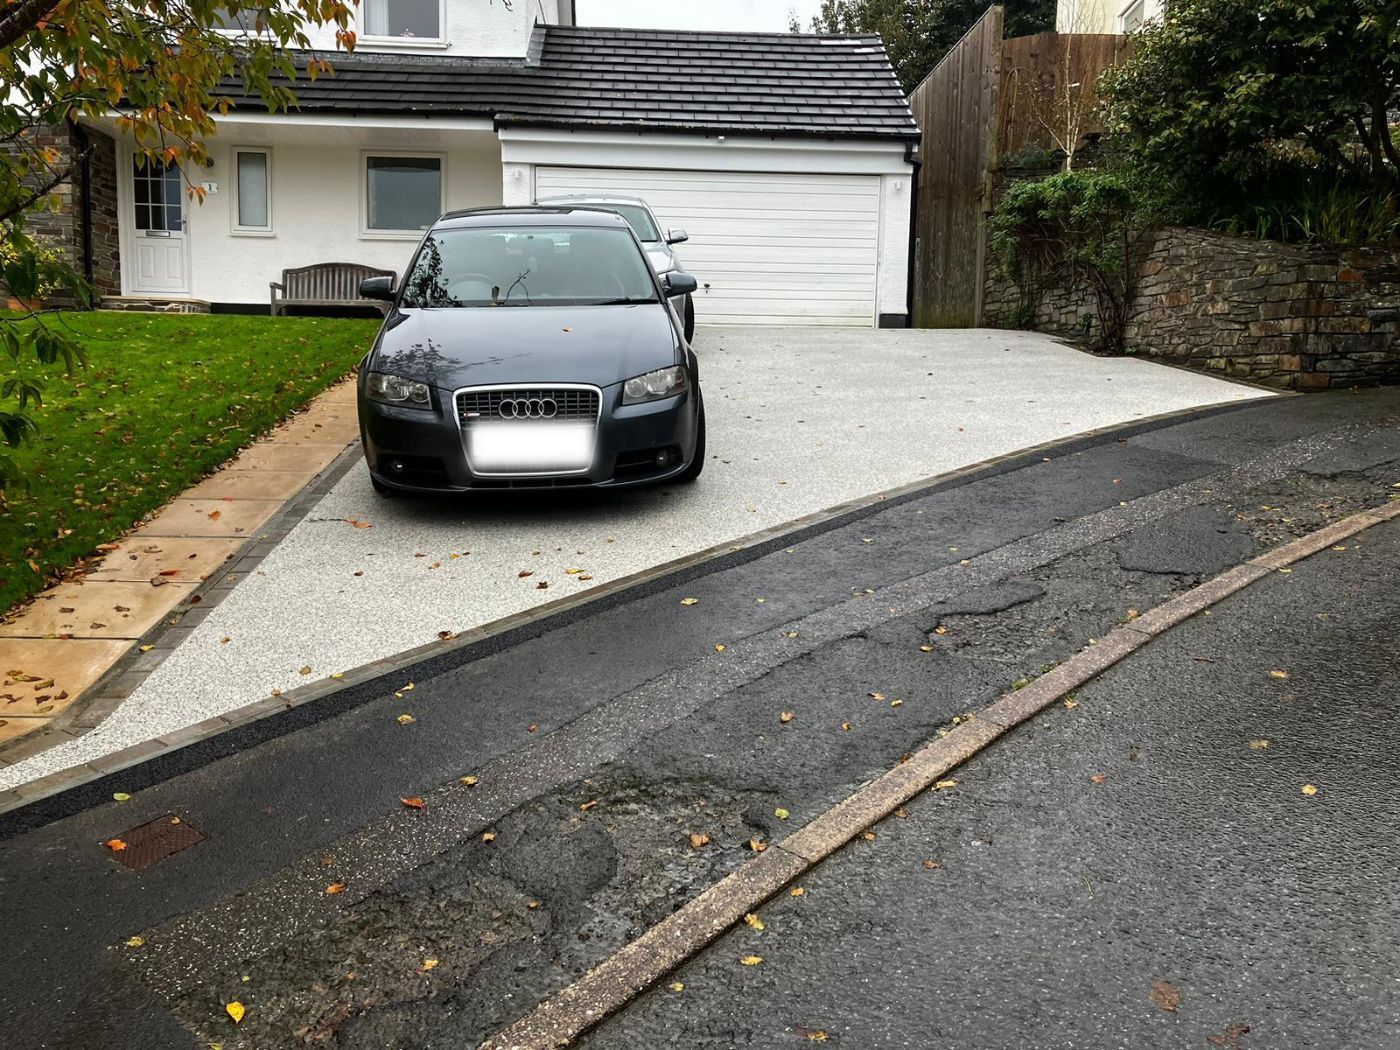 Light grey resin driveway with a black car parked on it, in front of a white bungalow.